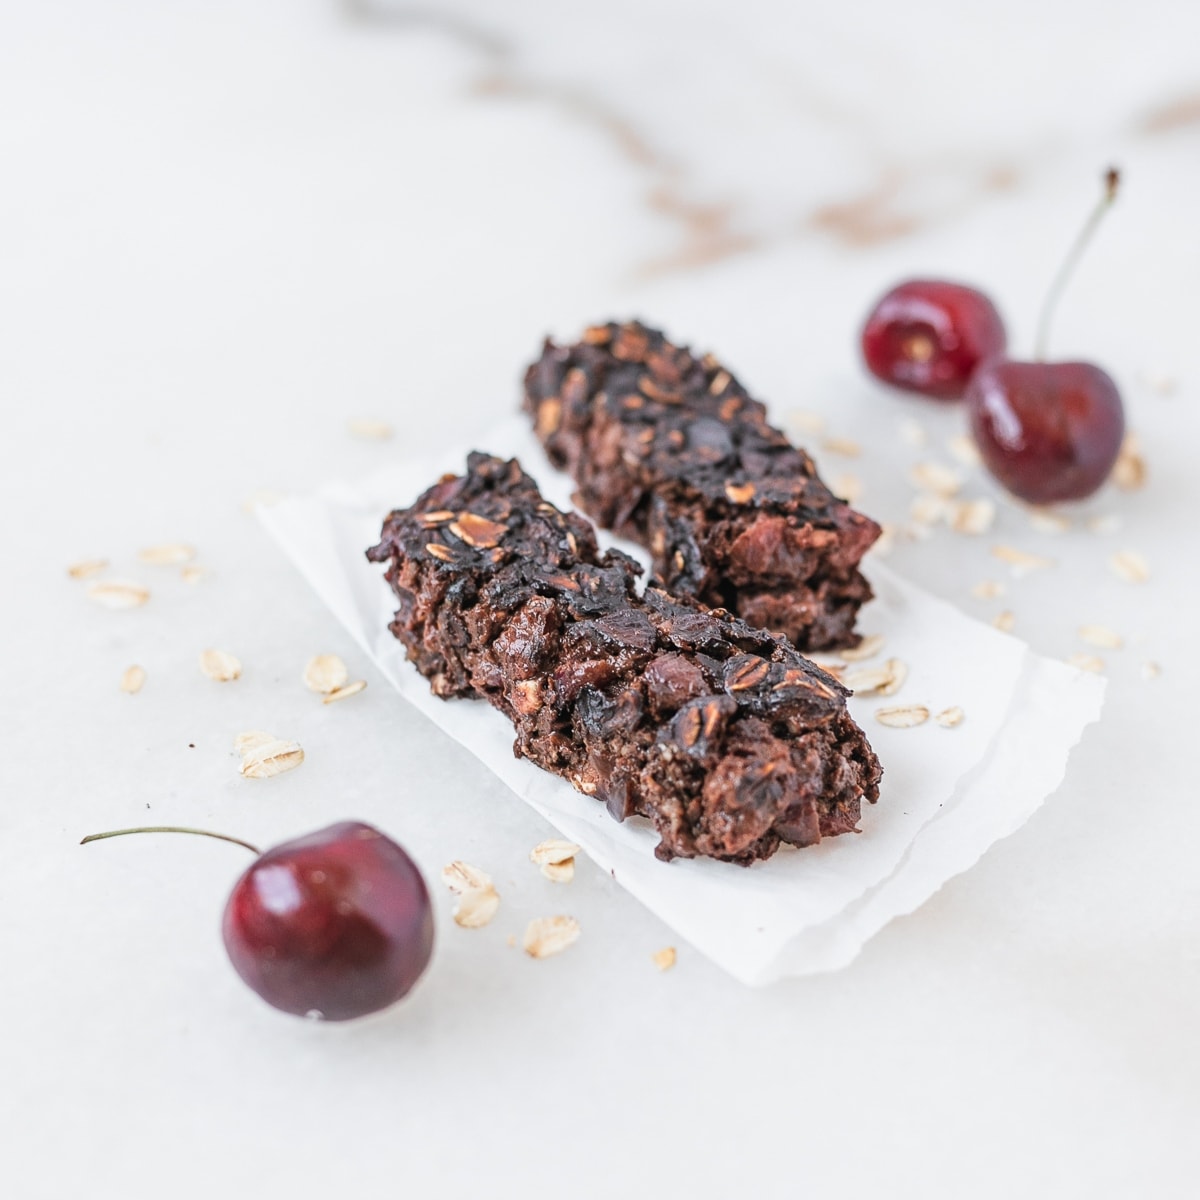 cherry chocolate baked oatmeal fingers for baby led weaning on a piece of parchment with cherries around them.